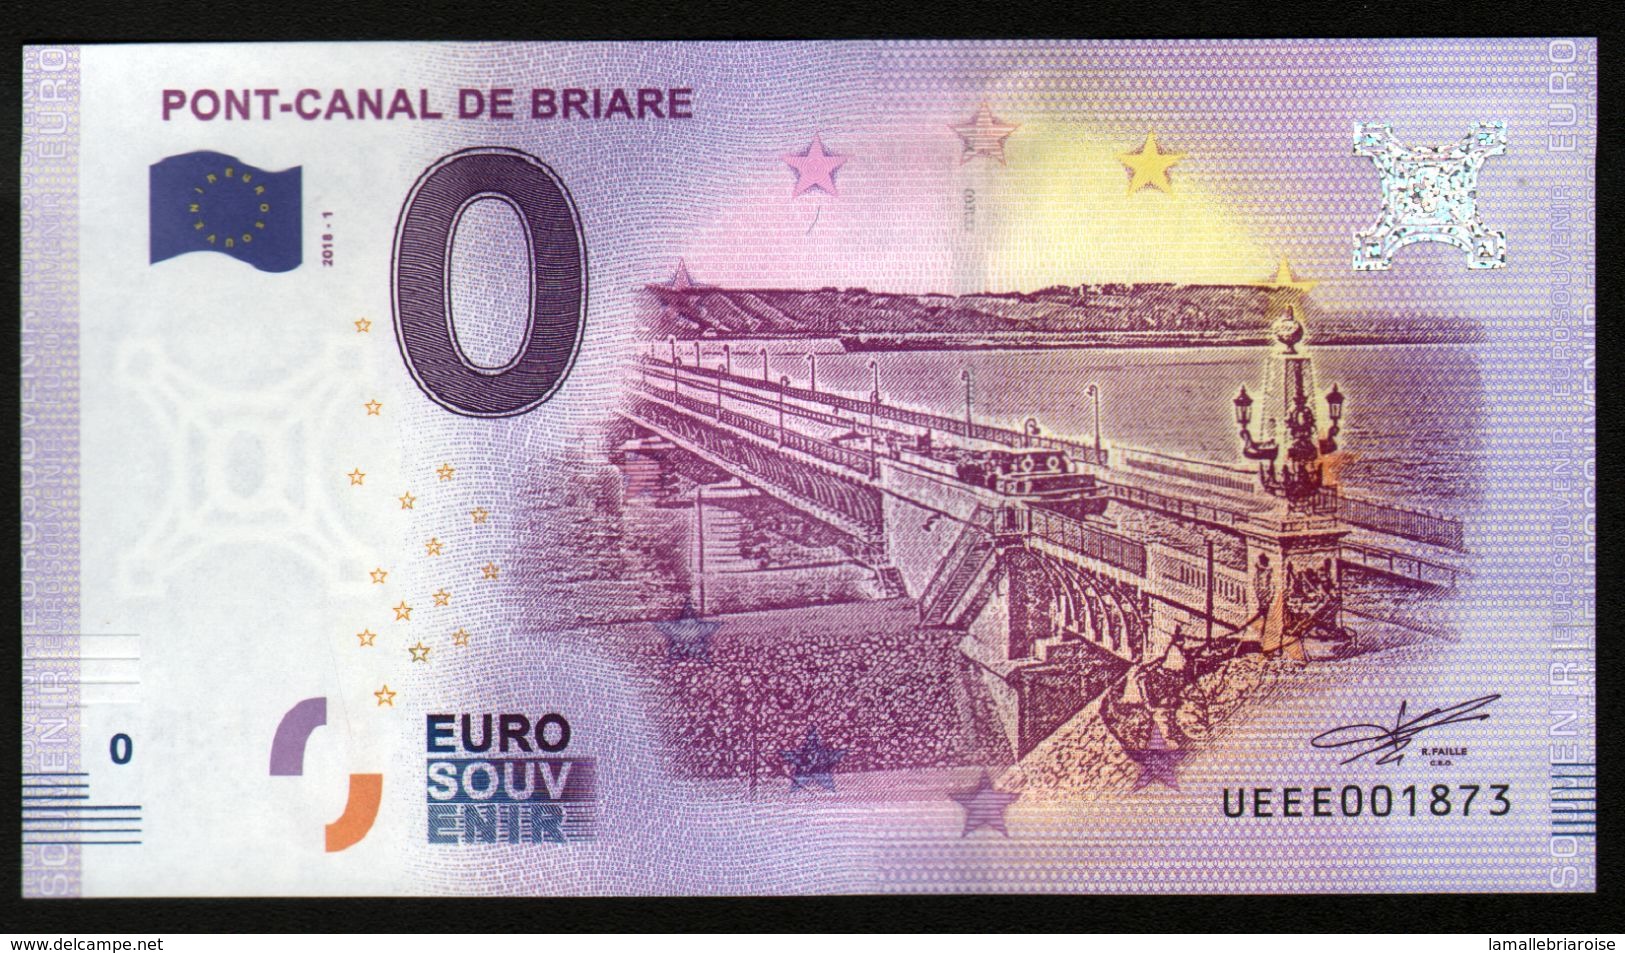 France - Billet Touristique 0 Euro 2018 N° 1873 (UEEE001873/5000) - PONT-CANAL DE BRIARE - Private Proofs / Unofficial